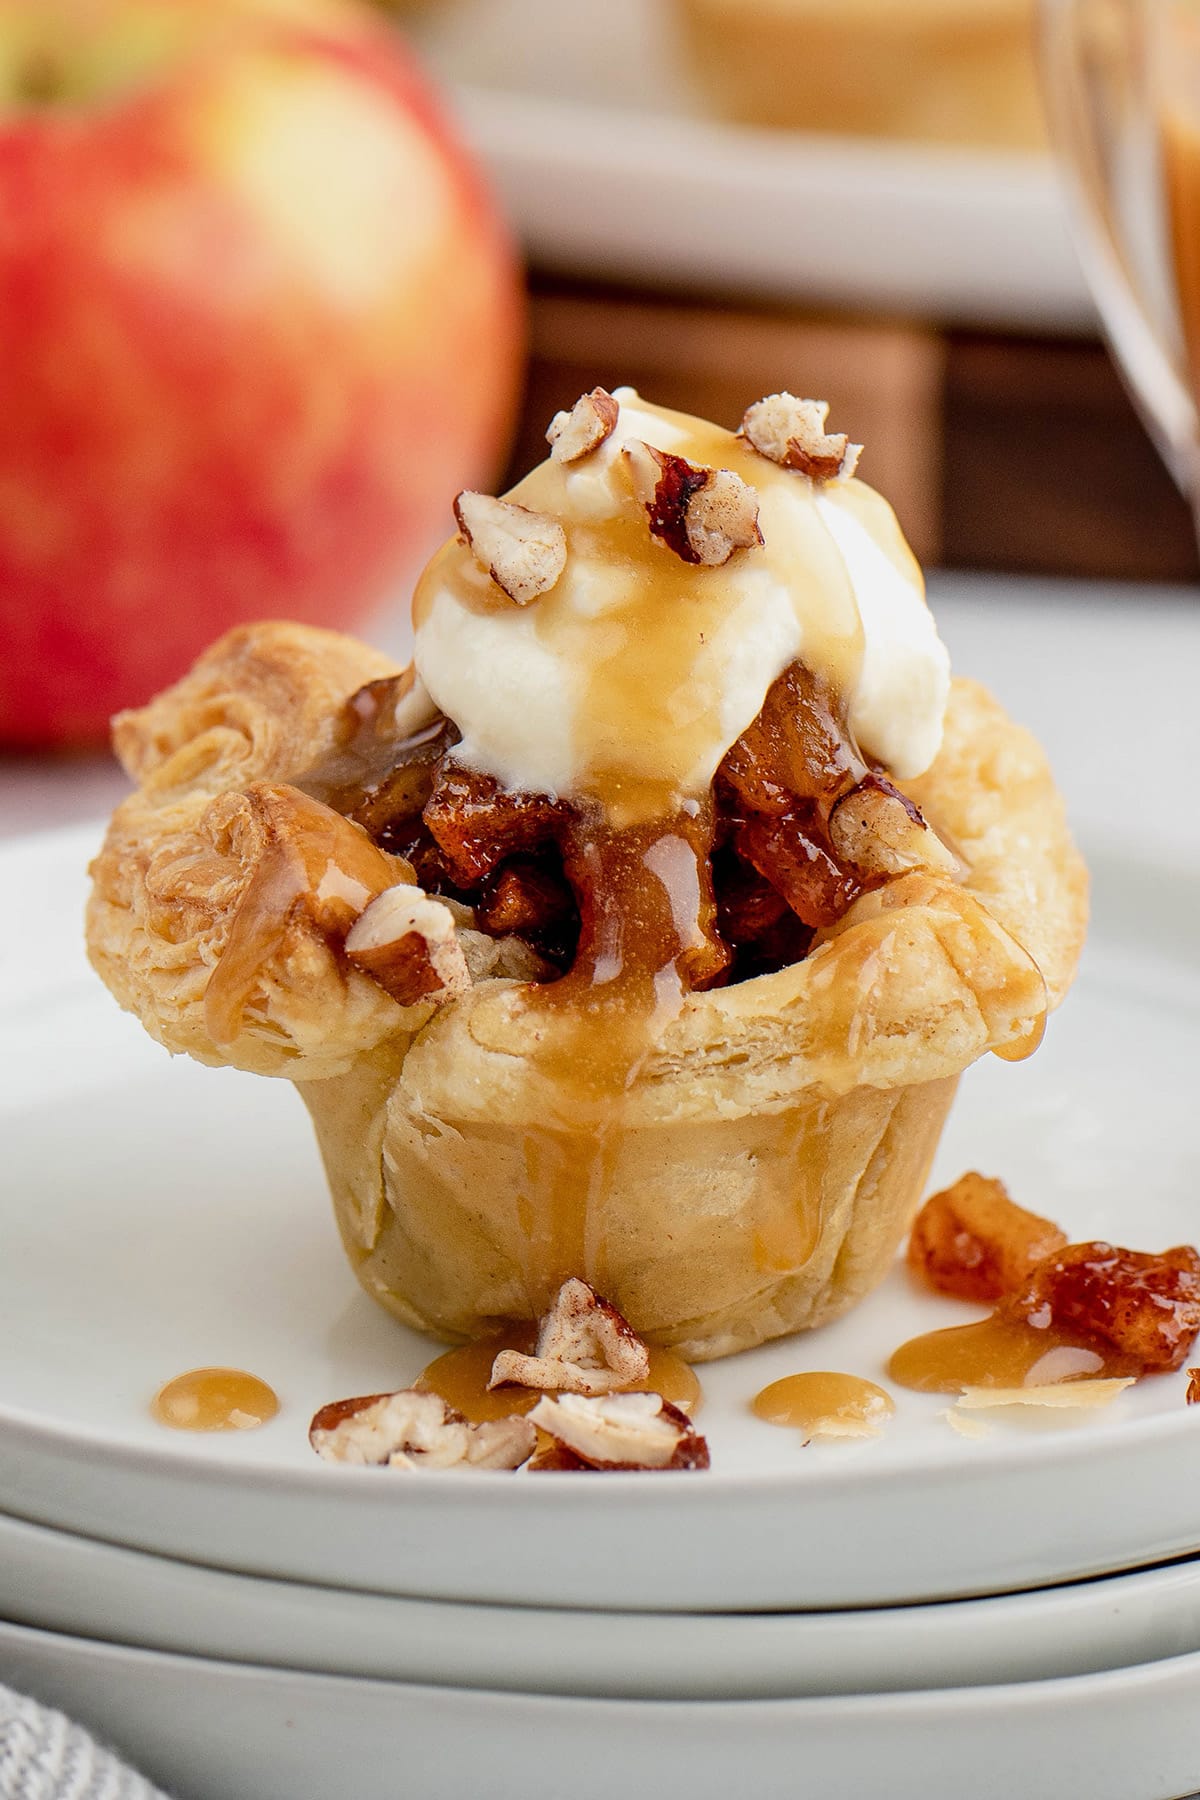 Apples with caramel and whipped cream in a tart shell.